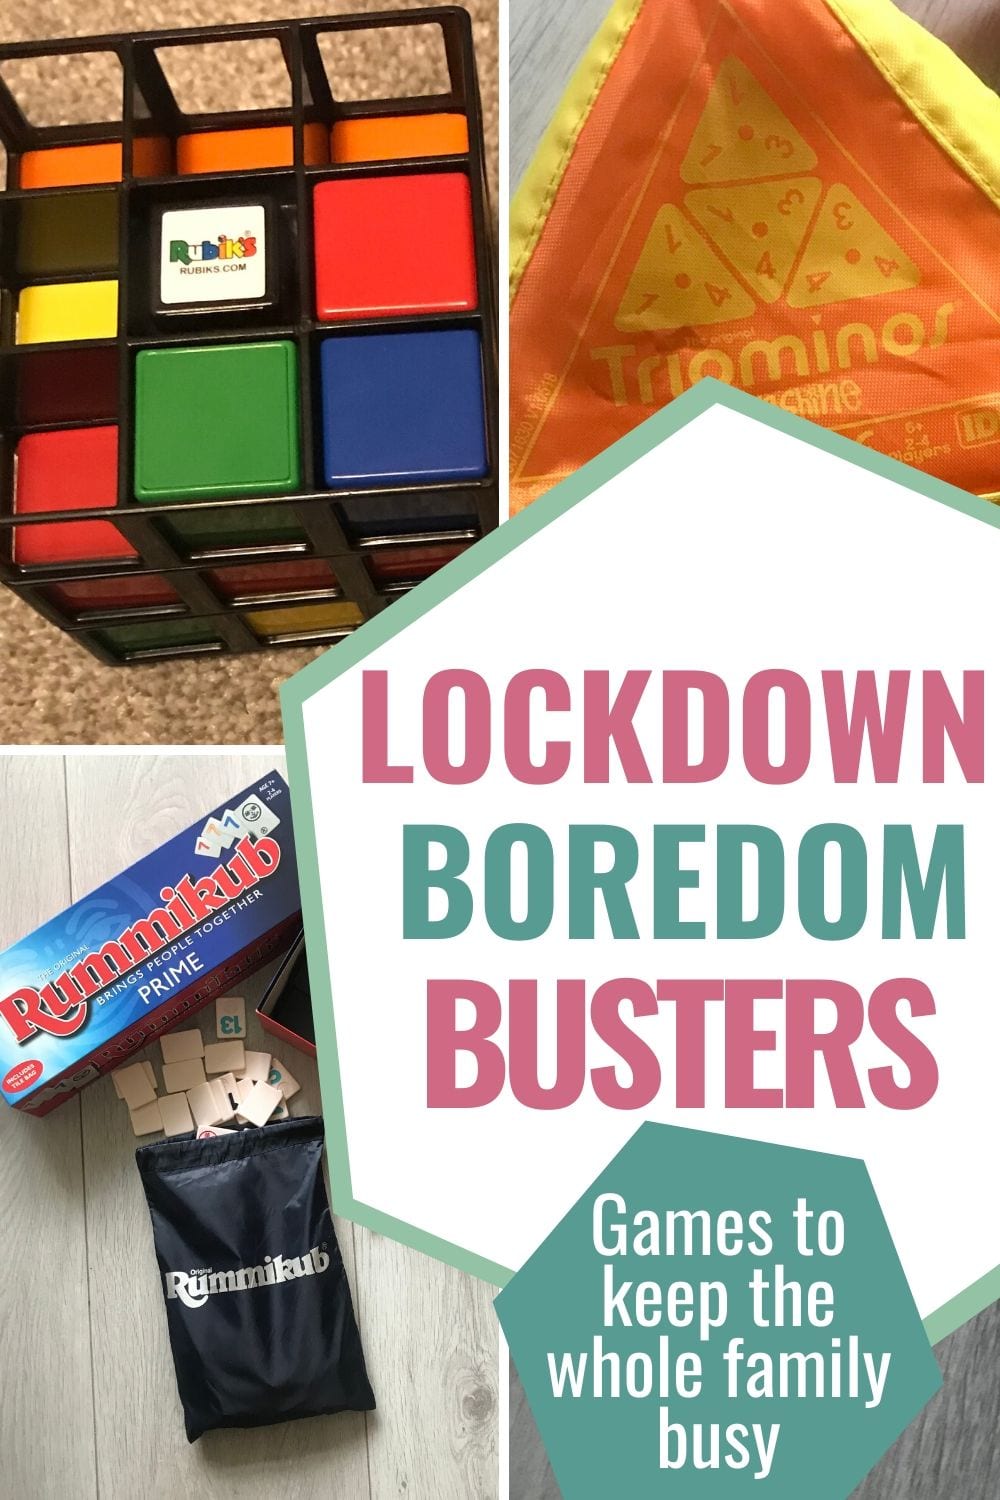 Boredom Busters for the whole family